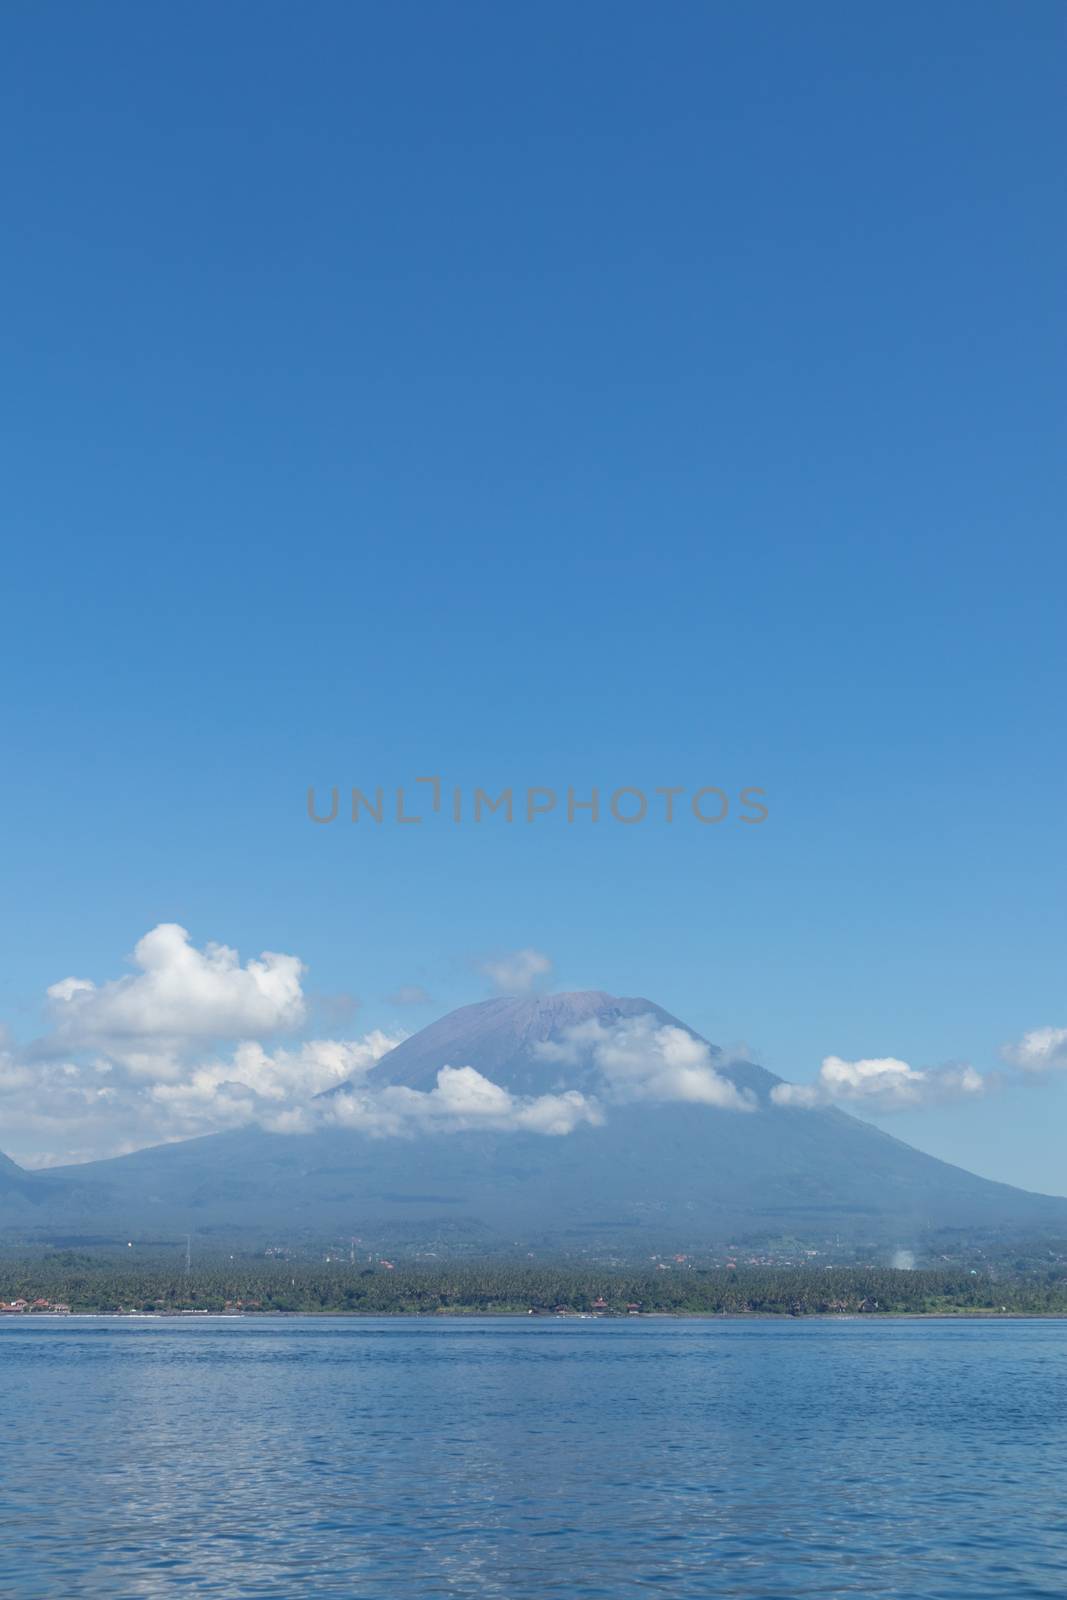 Agung volcano view from the sea. Bali island, Indonesia by kasto